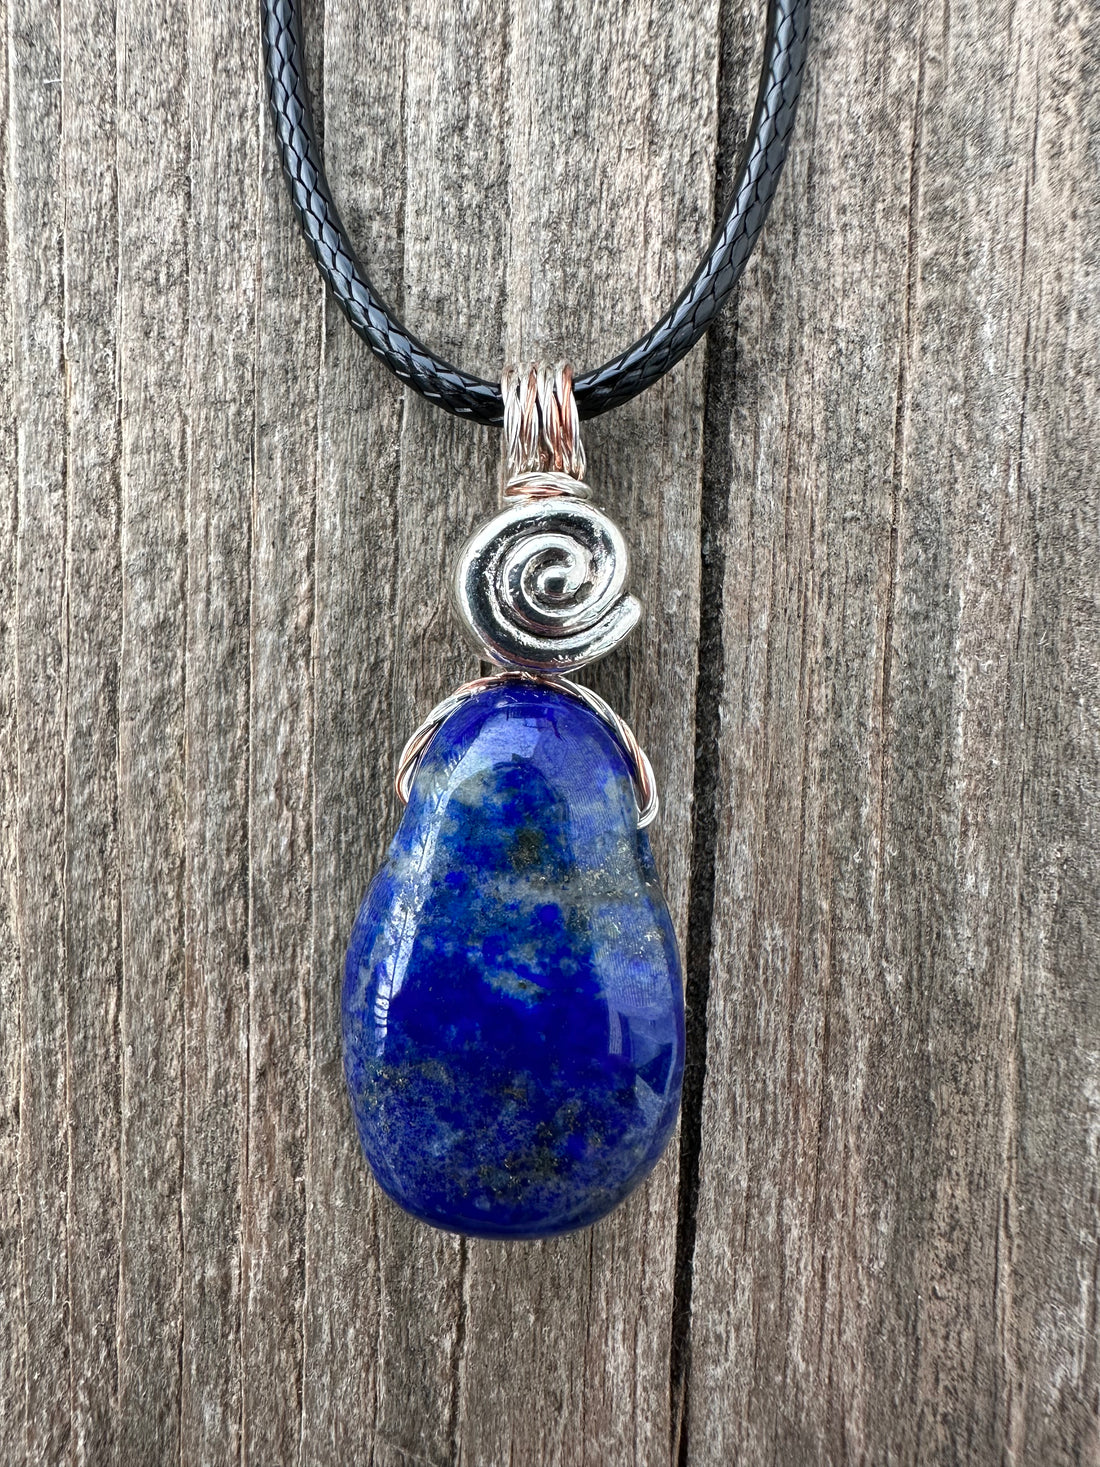 Lapis Lazuli for Protection & Finding Your Truths. Great Stone for Connecting to Higher Realms